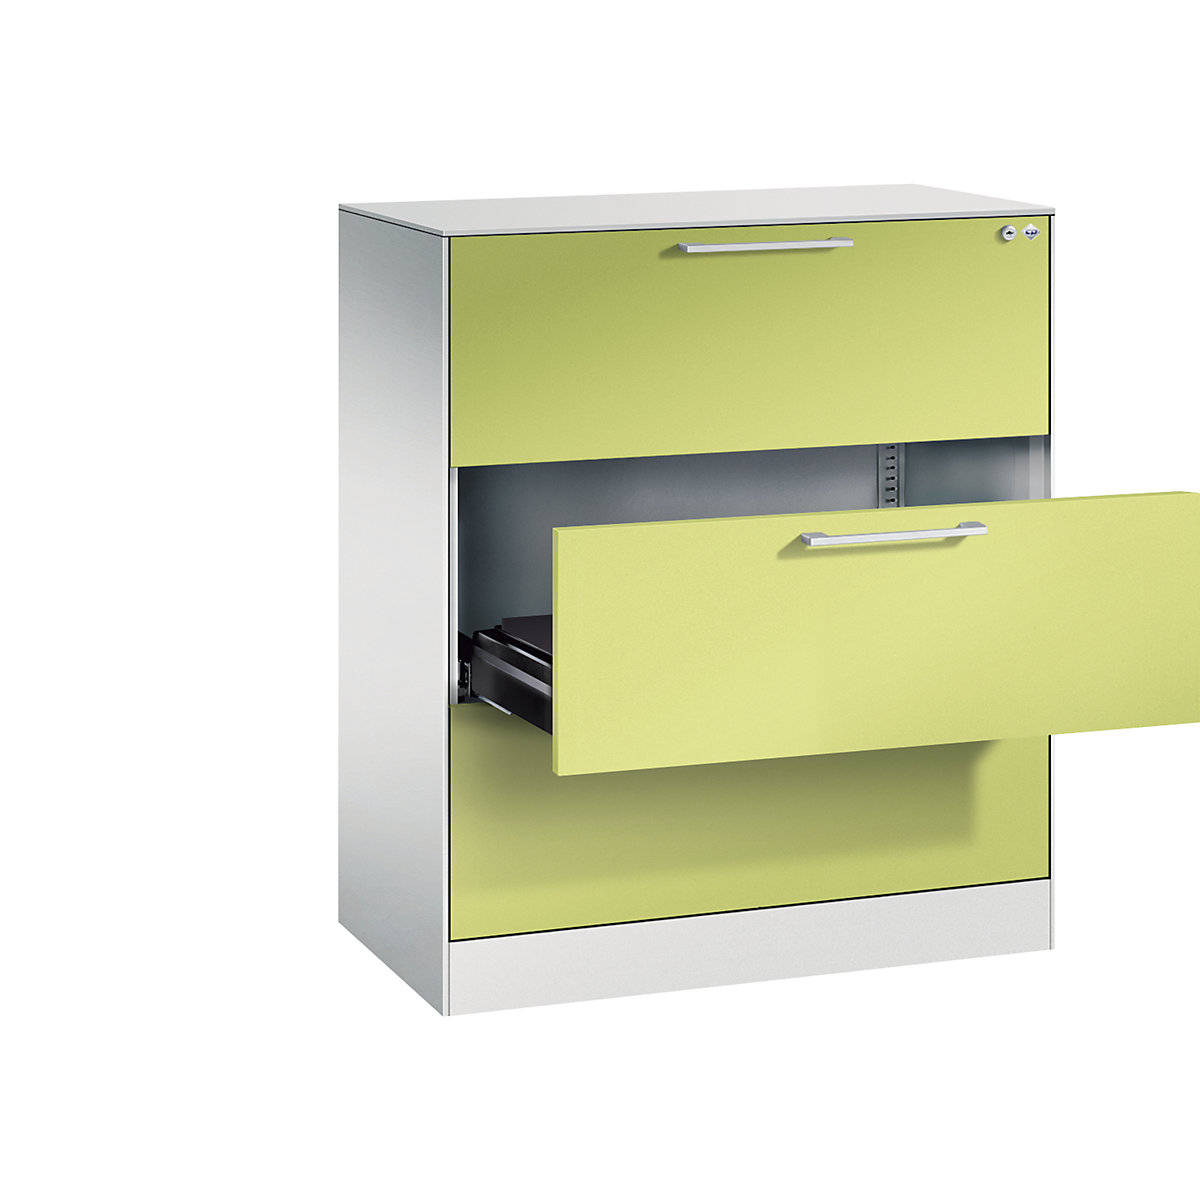 ASISTO card file cabinet – C+P, height 992 mm, with 3 drawers, A4 landscape, light grey/viridian green-4